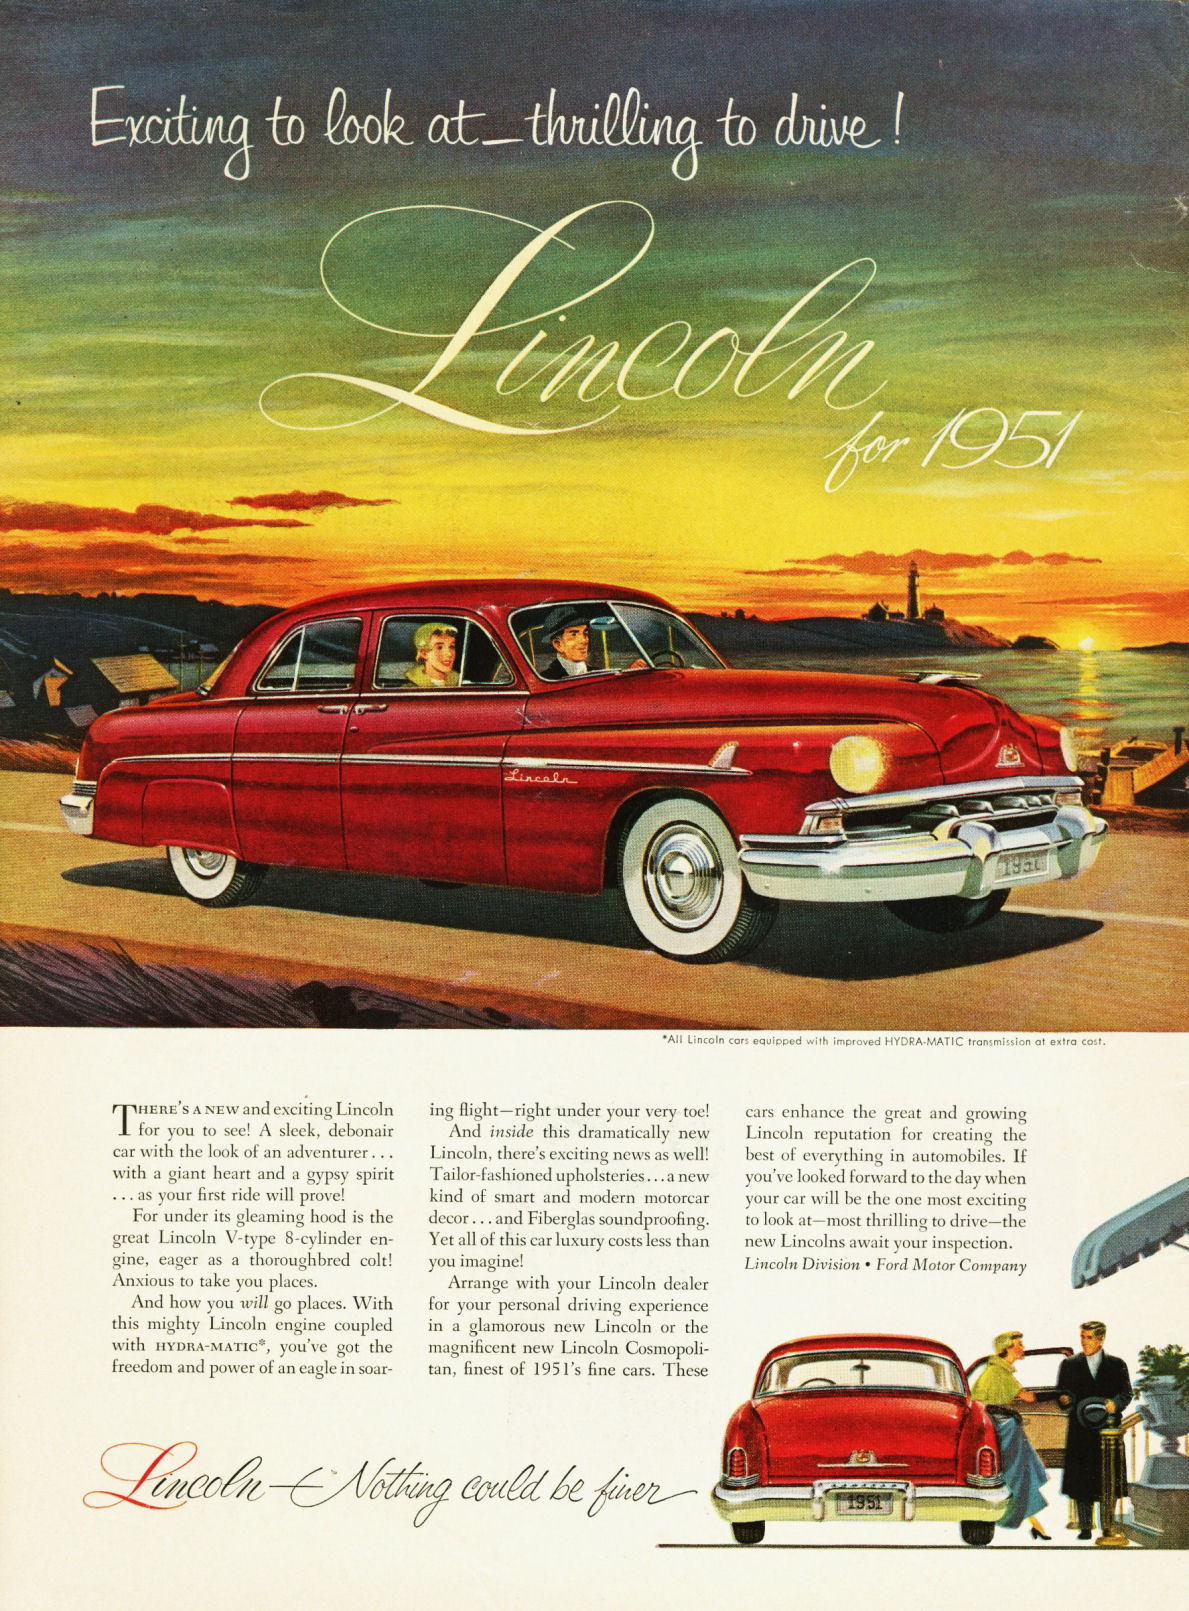 1951 Lincoln Auto Advertising